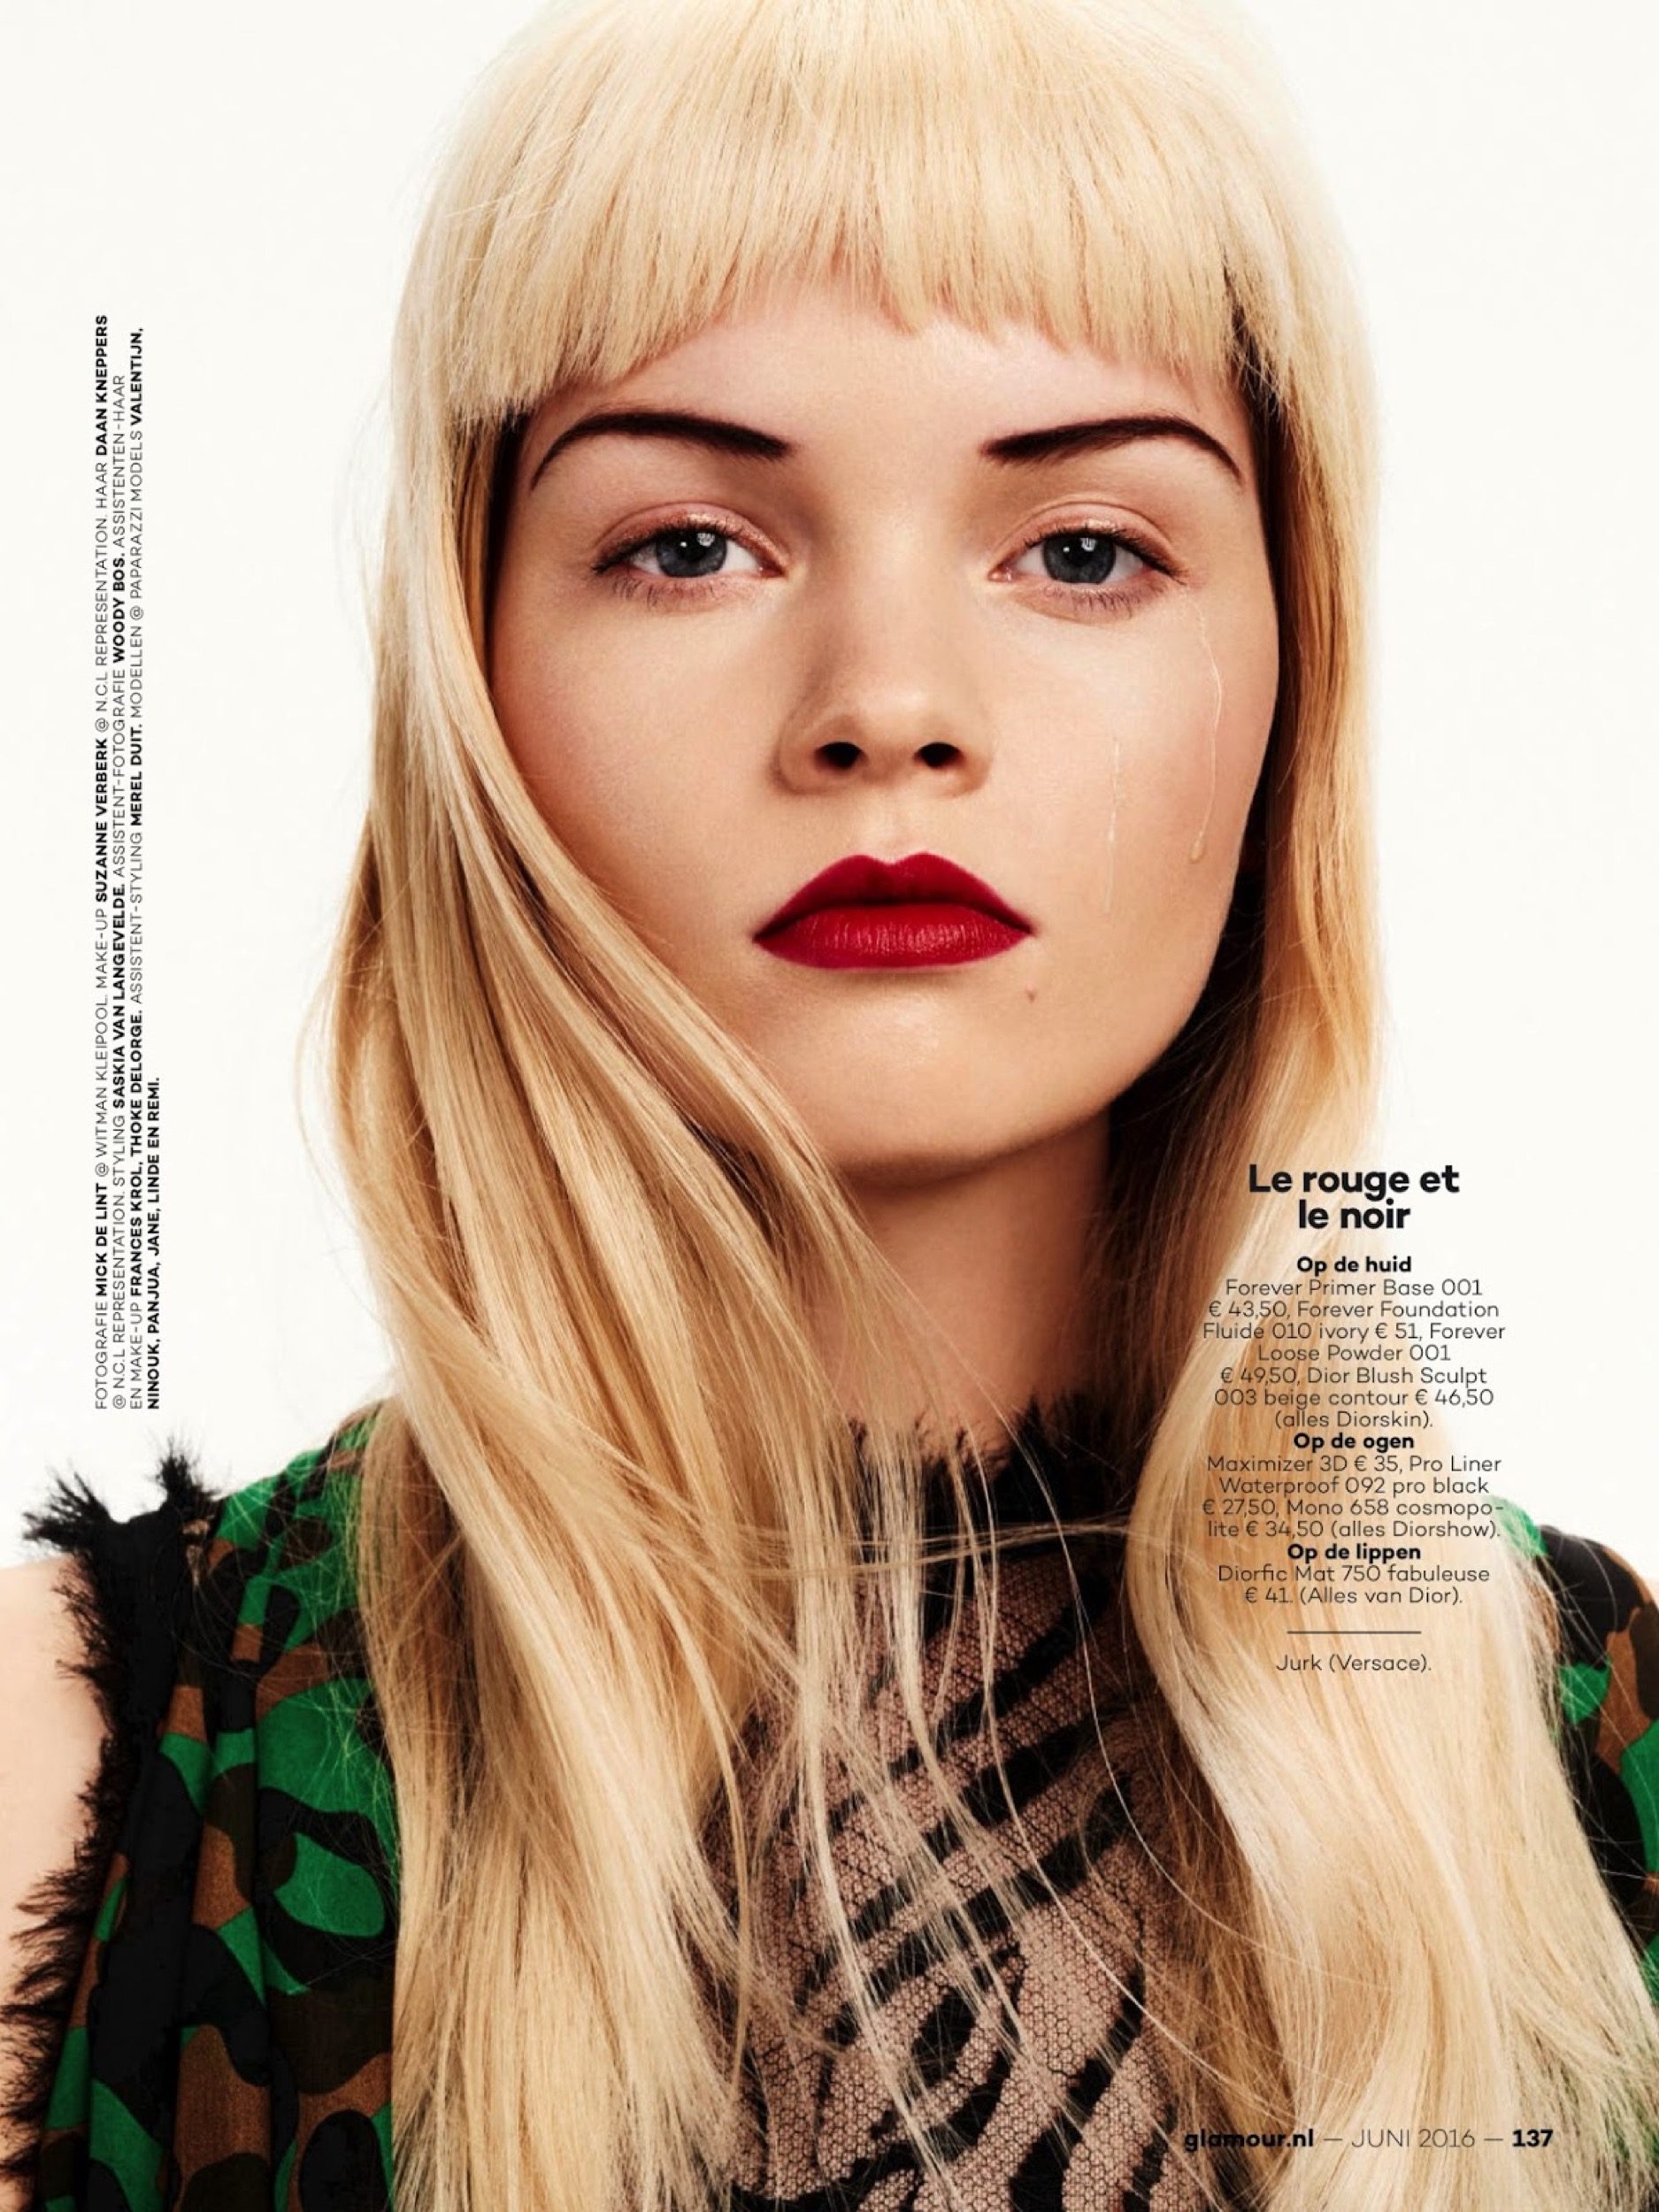 kathrin-hohberg-glamour-nl-cry-baby-mick-de-lint-06